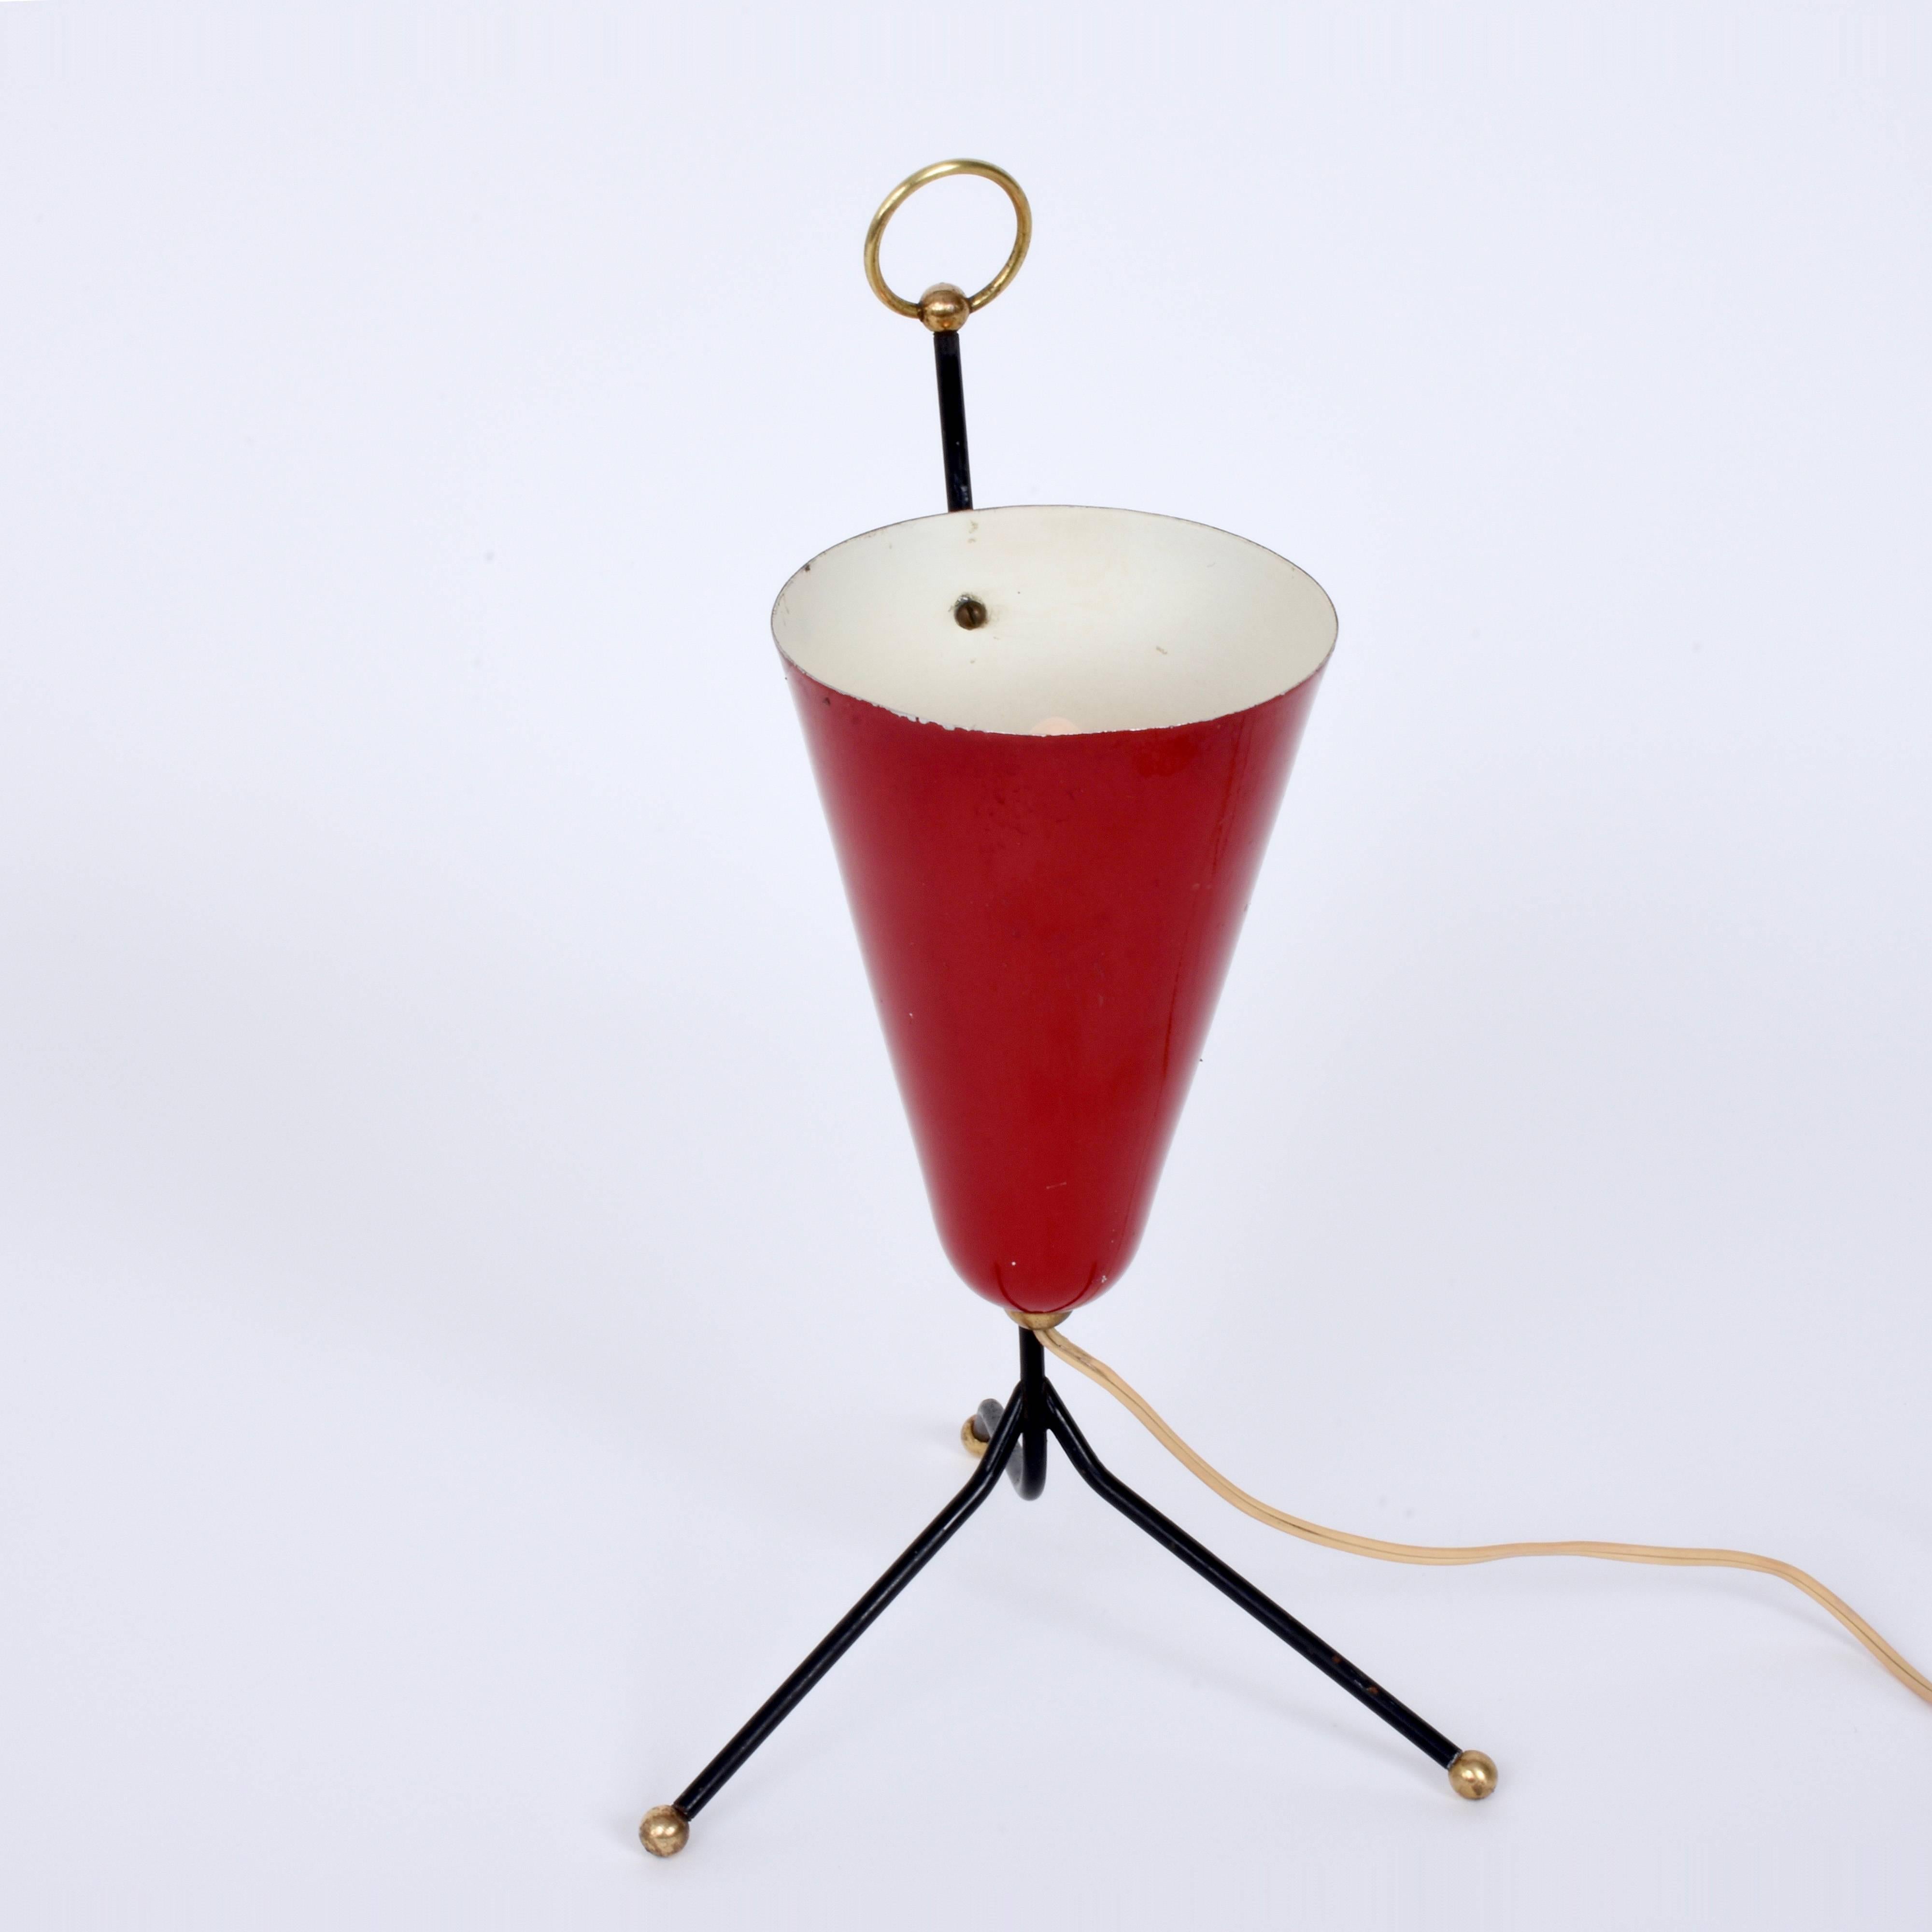 Red Lacquered Metal and Brass Conical Italian Table Lamp with Tripod, 1950s For Sale 1